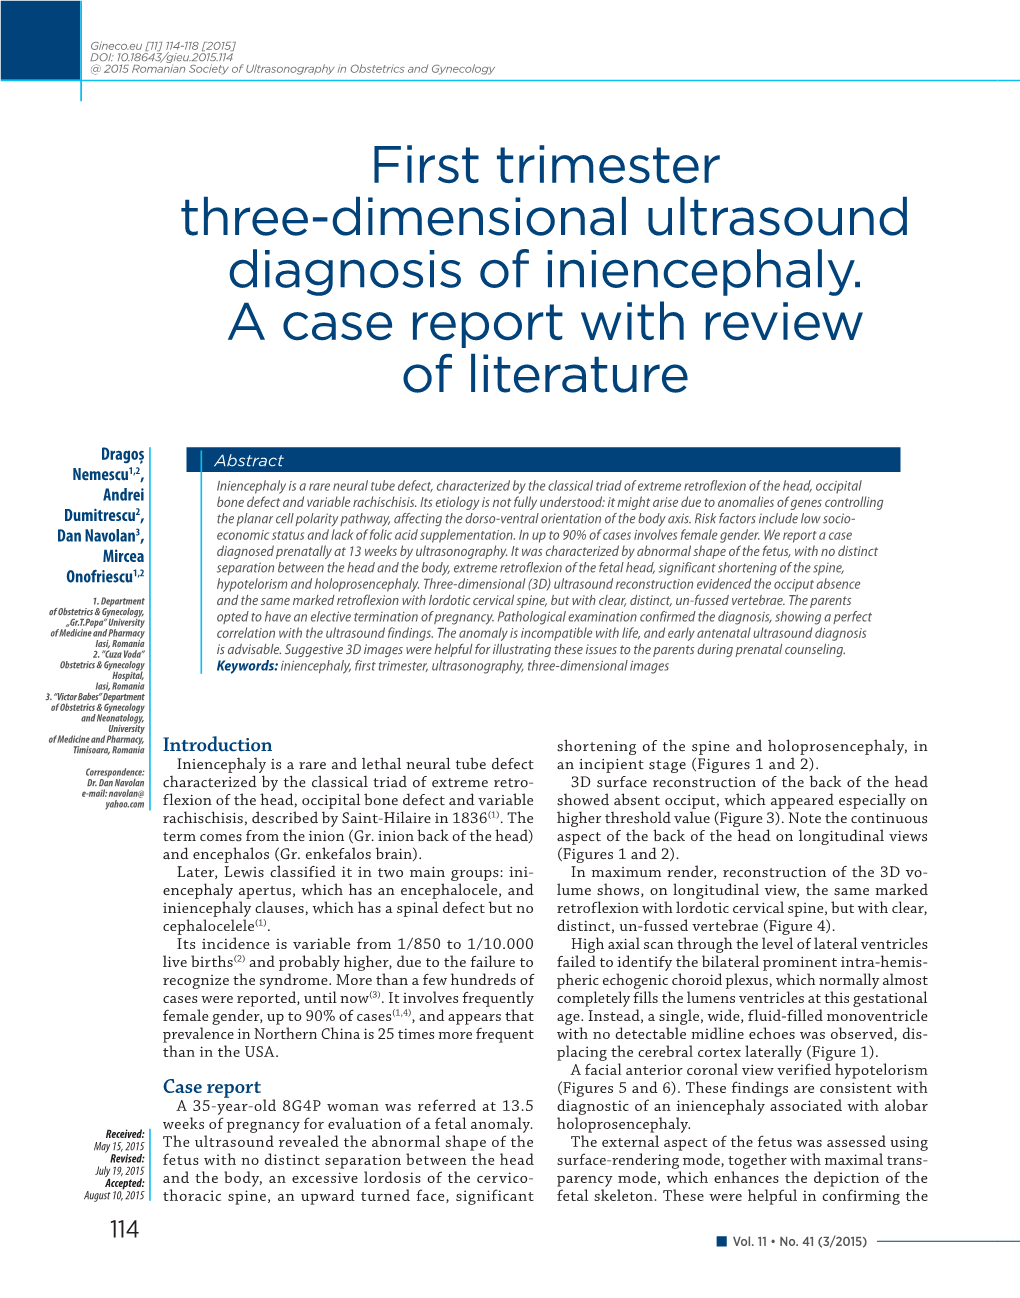 First Trimester Three-Dimensional Ultrasound Diagnosis of Iniencephaly. a Case Report with Review of Literature